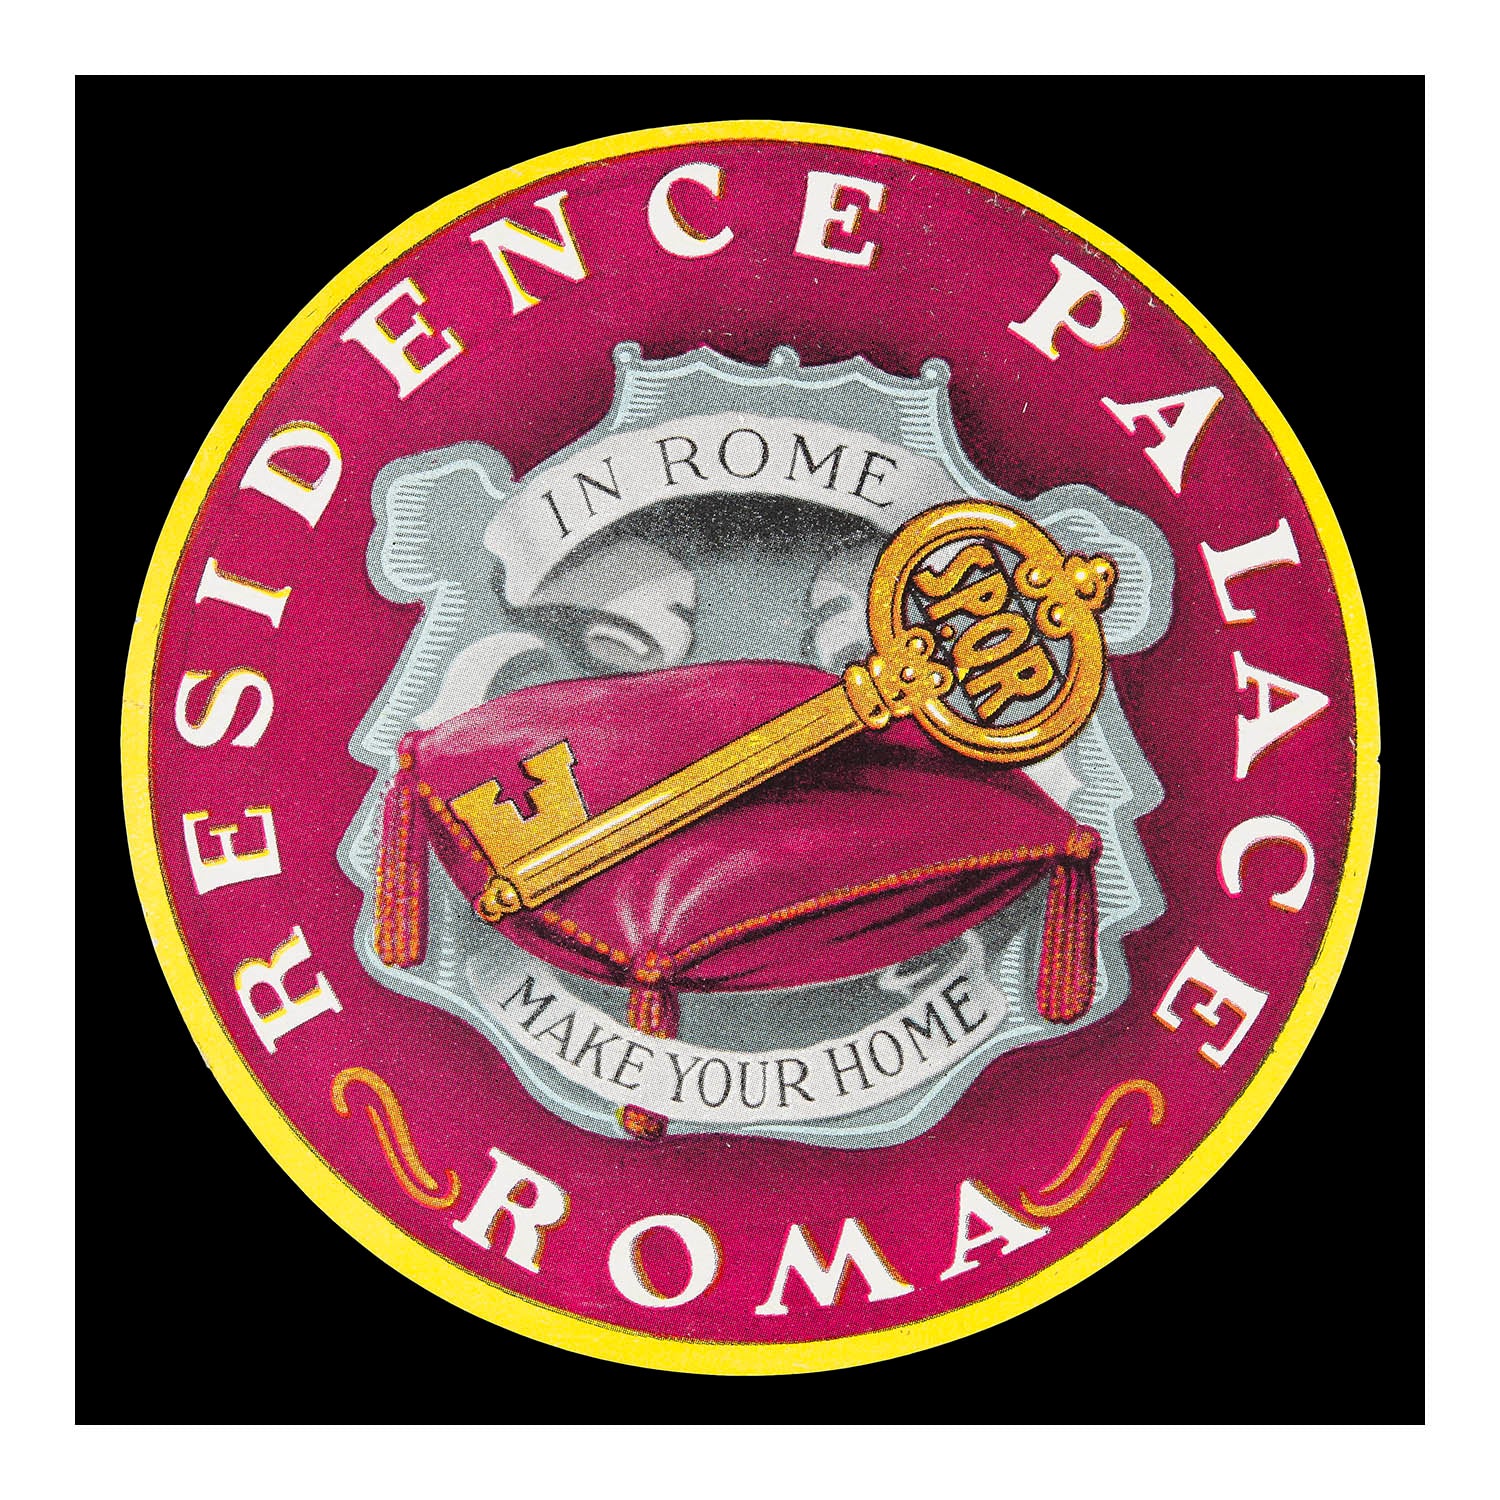 Residence Palace. In Rome Make Your Home (Luggage Label)